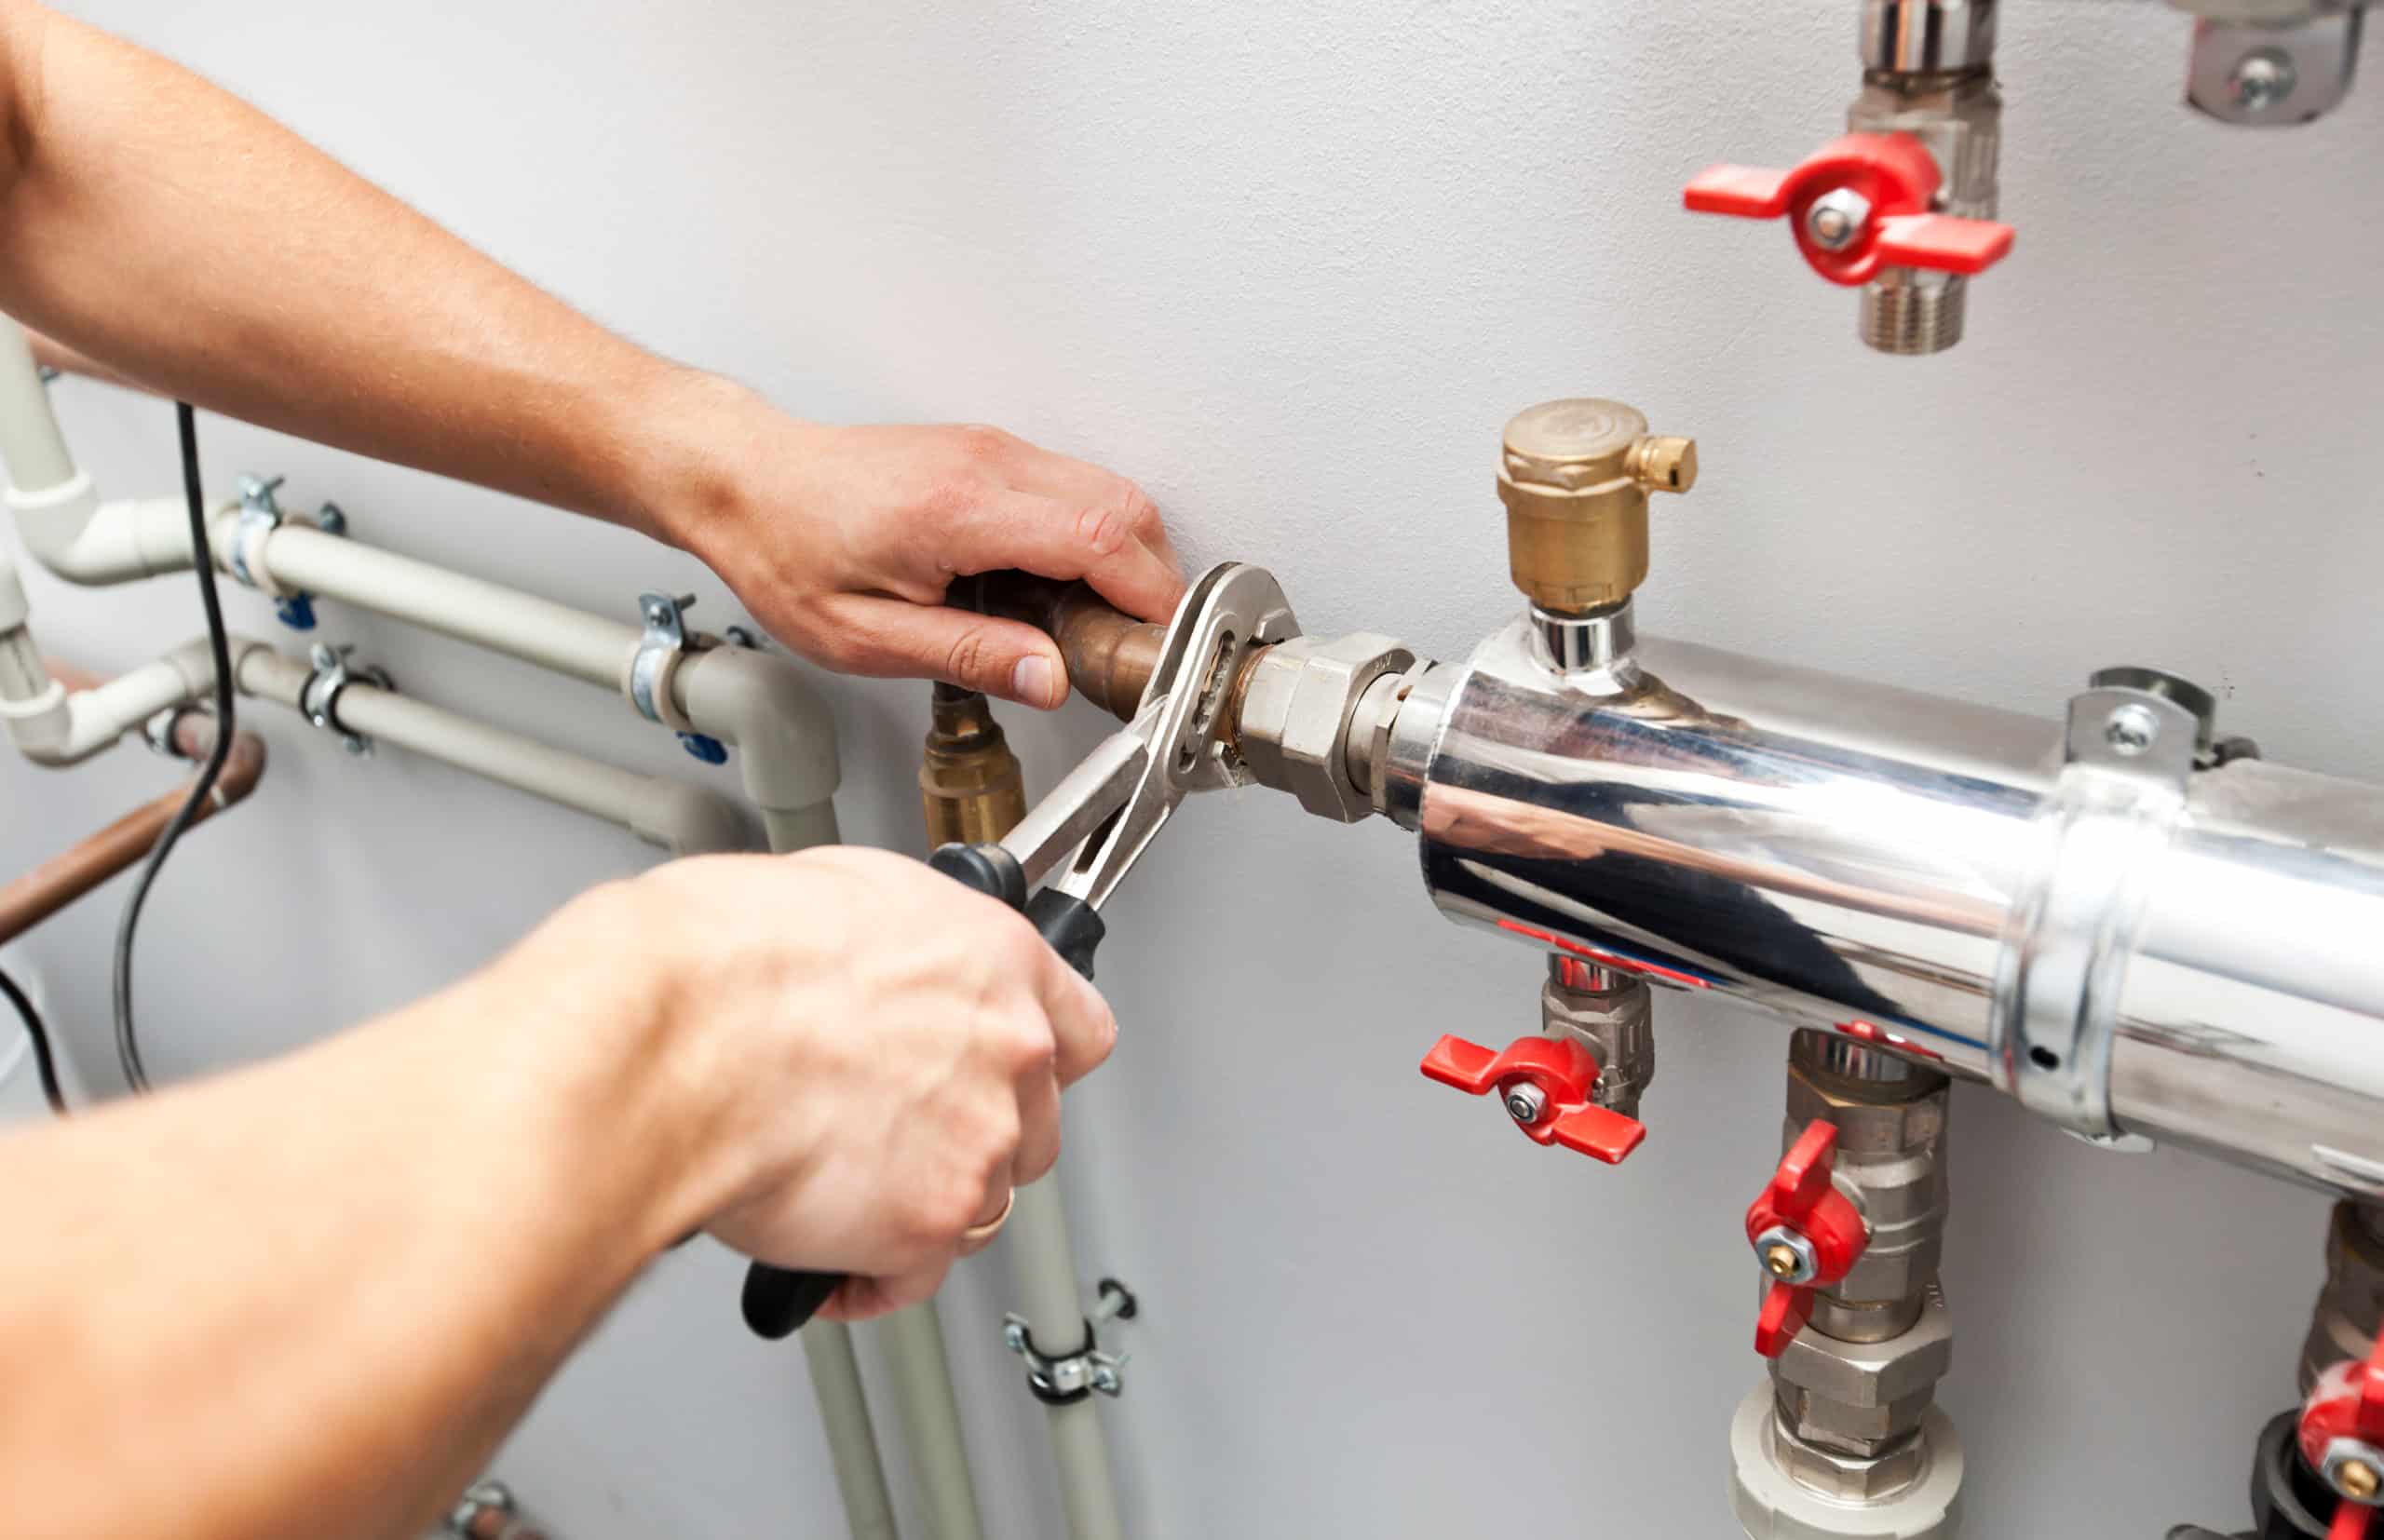 Finding Reliable Plumbers Near Palmetto, GA: A Guide to Locating Trusted Plumbing Services